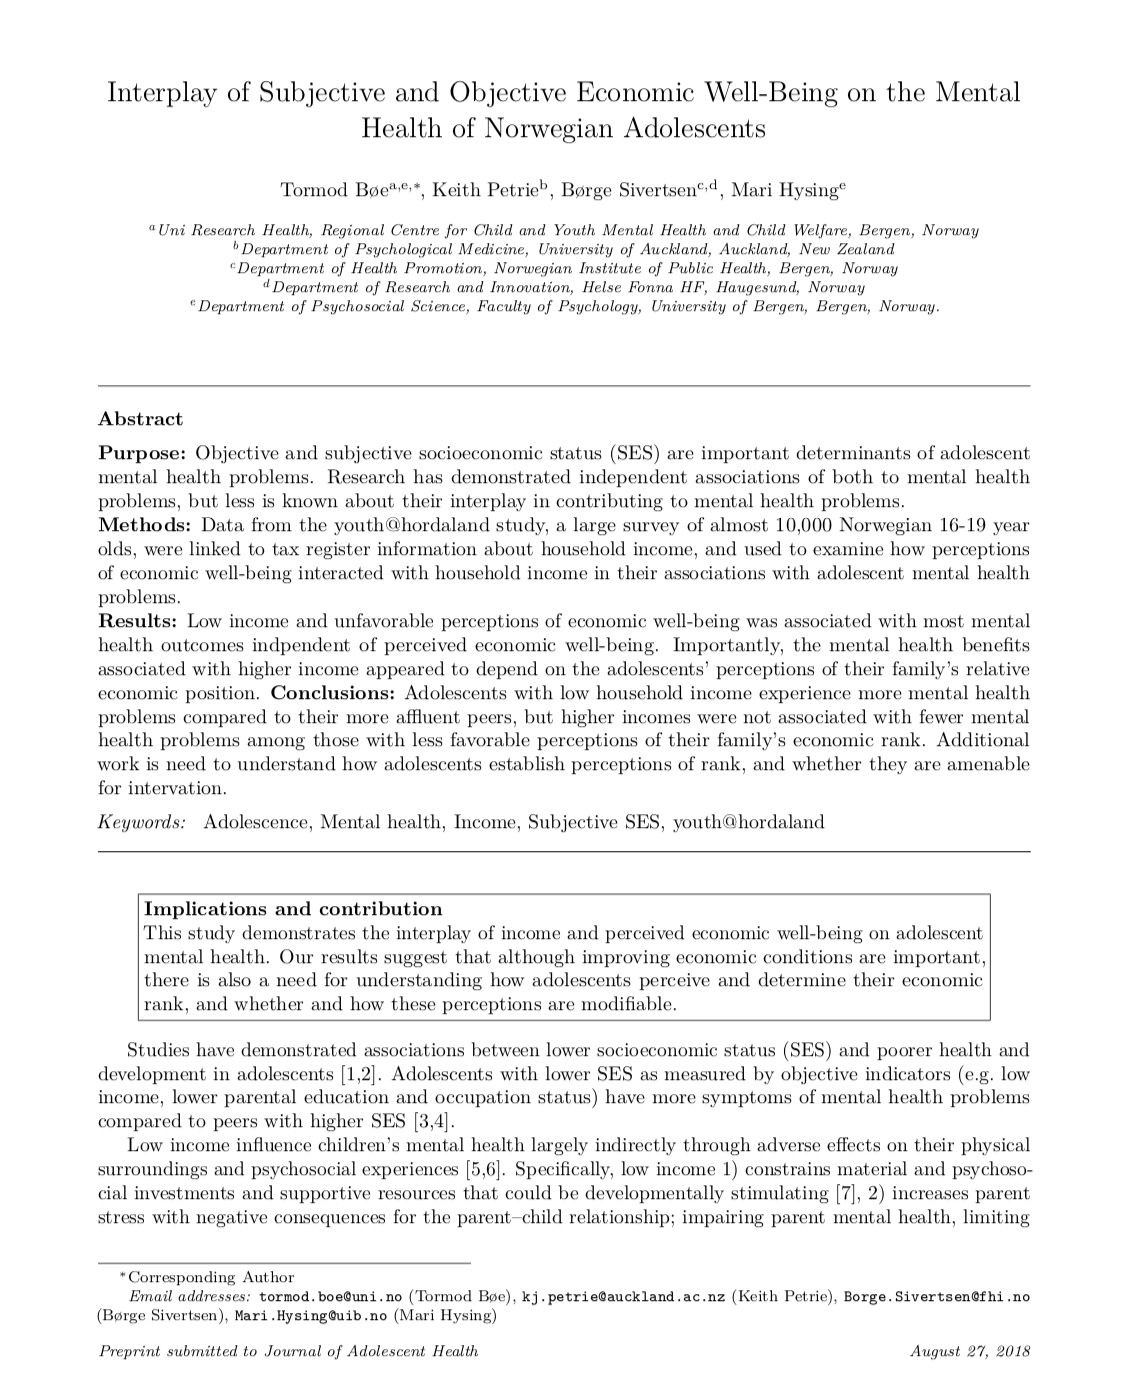 Example paper formatted for Elsevier journals